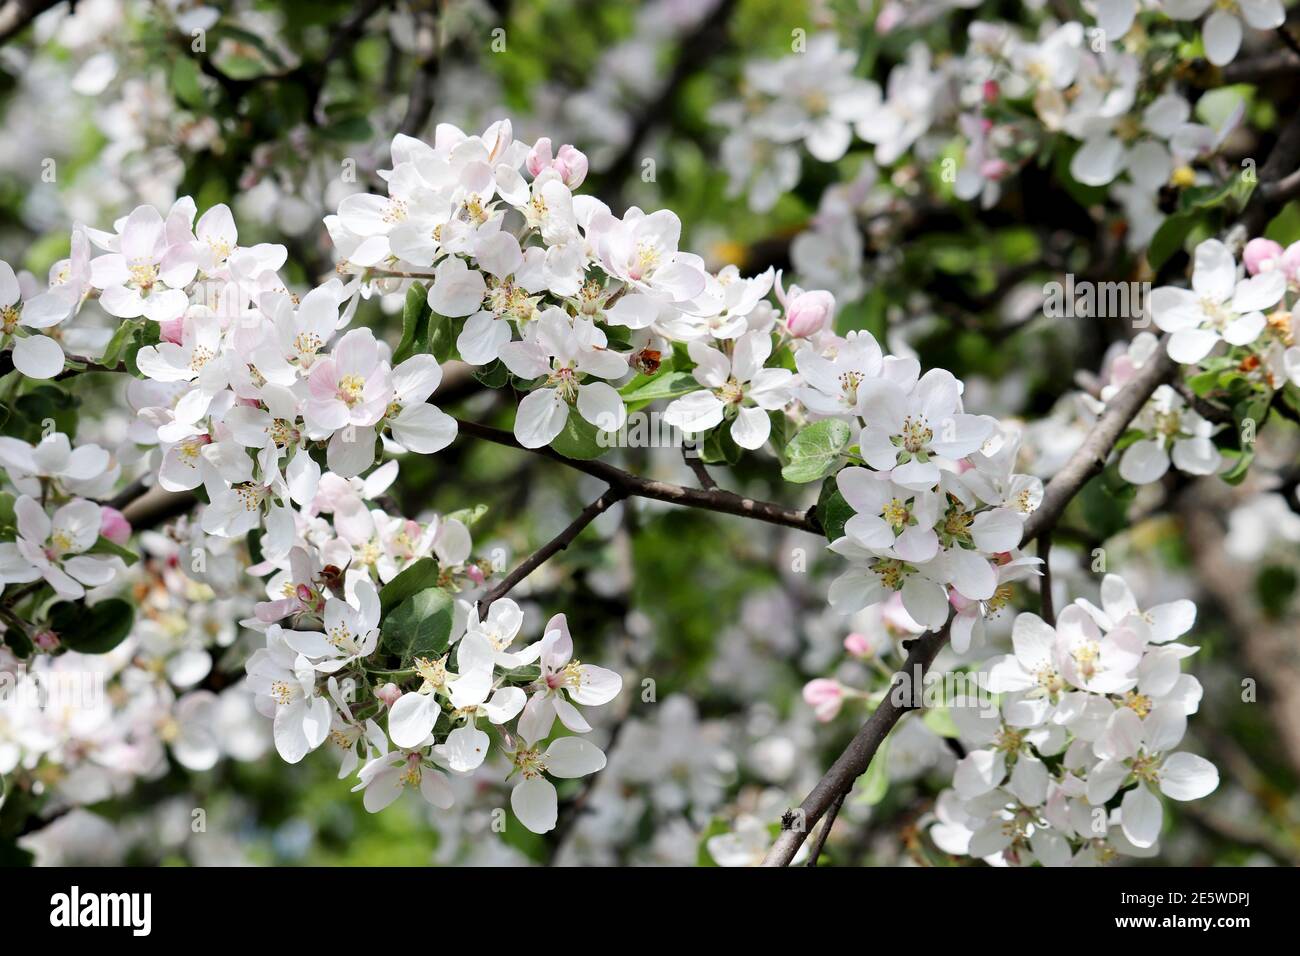 Apple blossom, spring flowers with colorful white and pink petals on a branch. Apple tree in orchard on blurred background, soft colors Stock Photo